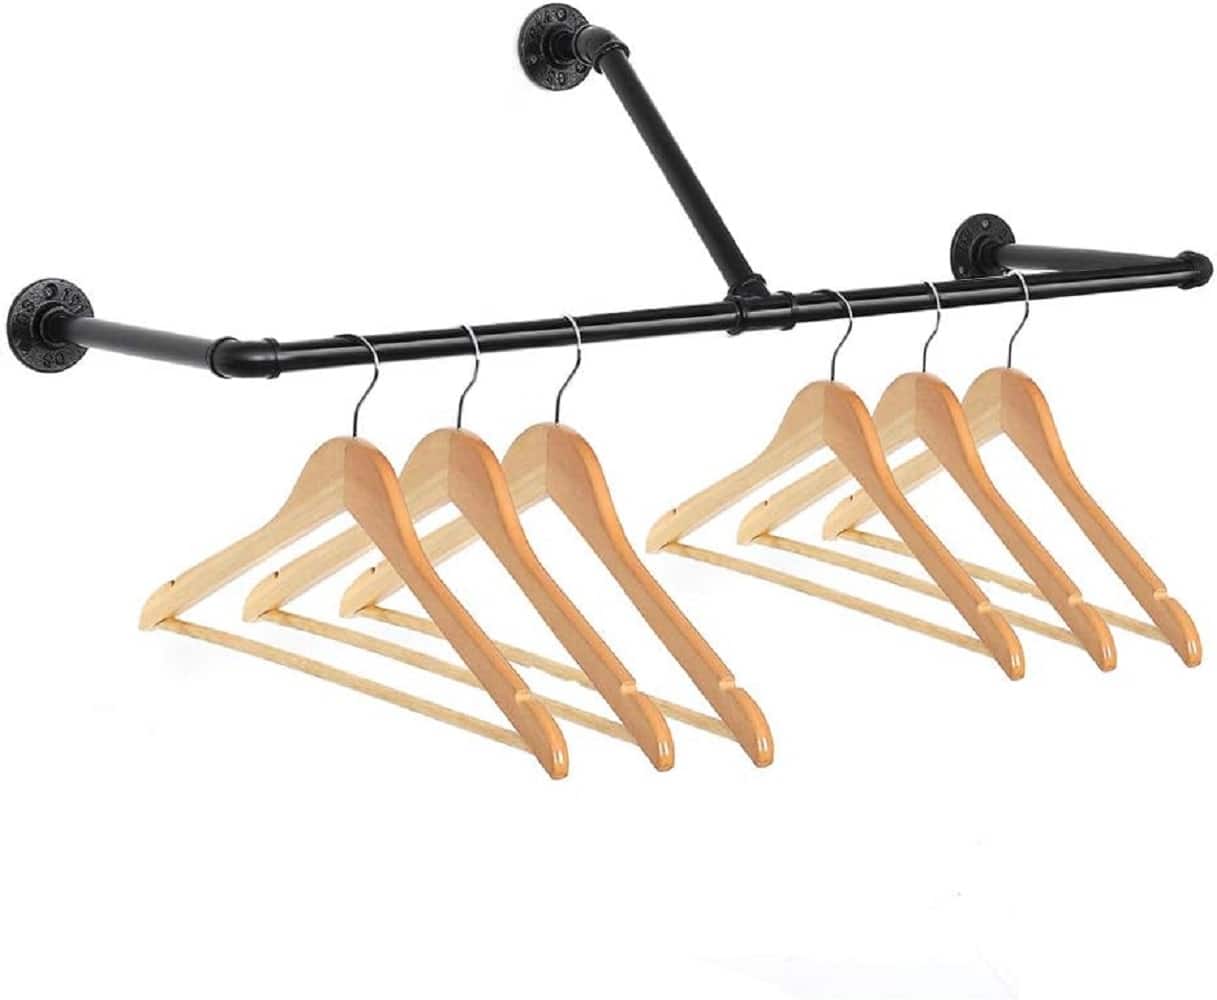 Clothing Rack. Industrial Retail Clothing and Garment Rack. Store